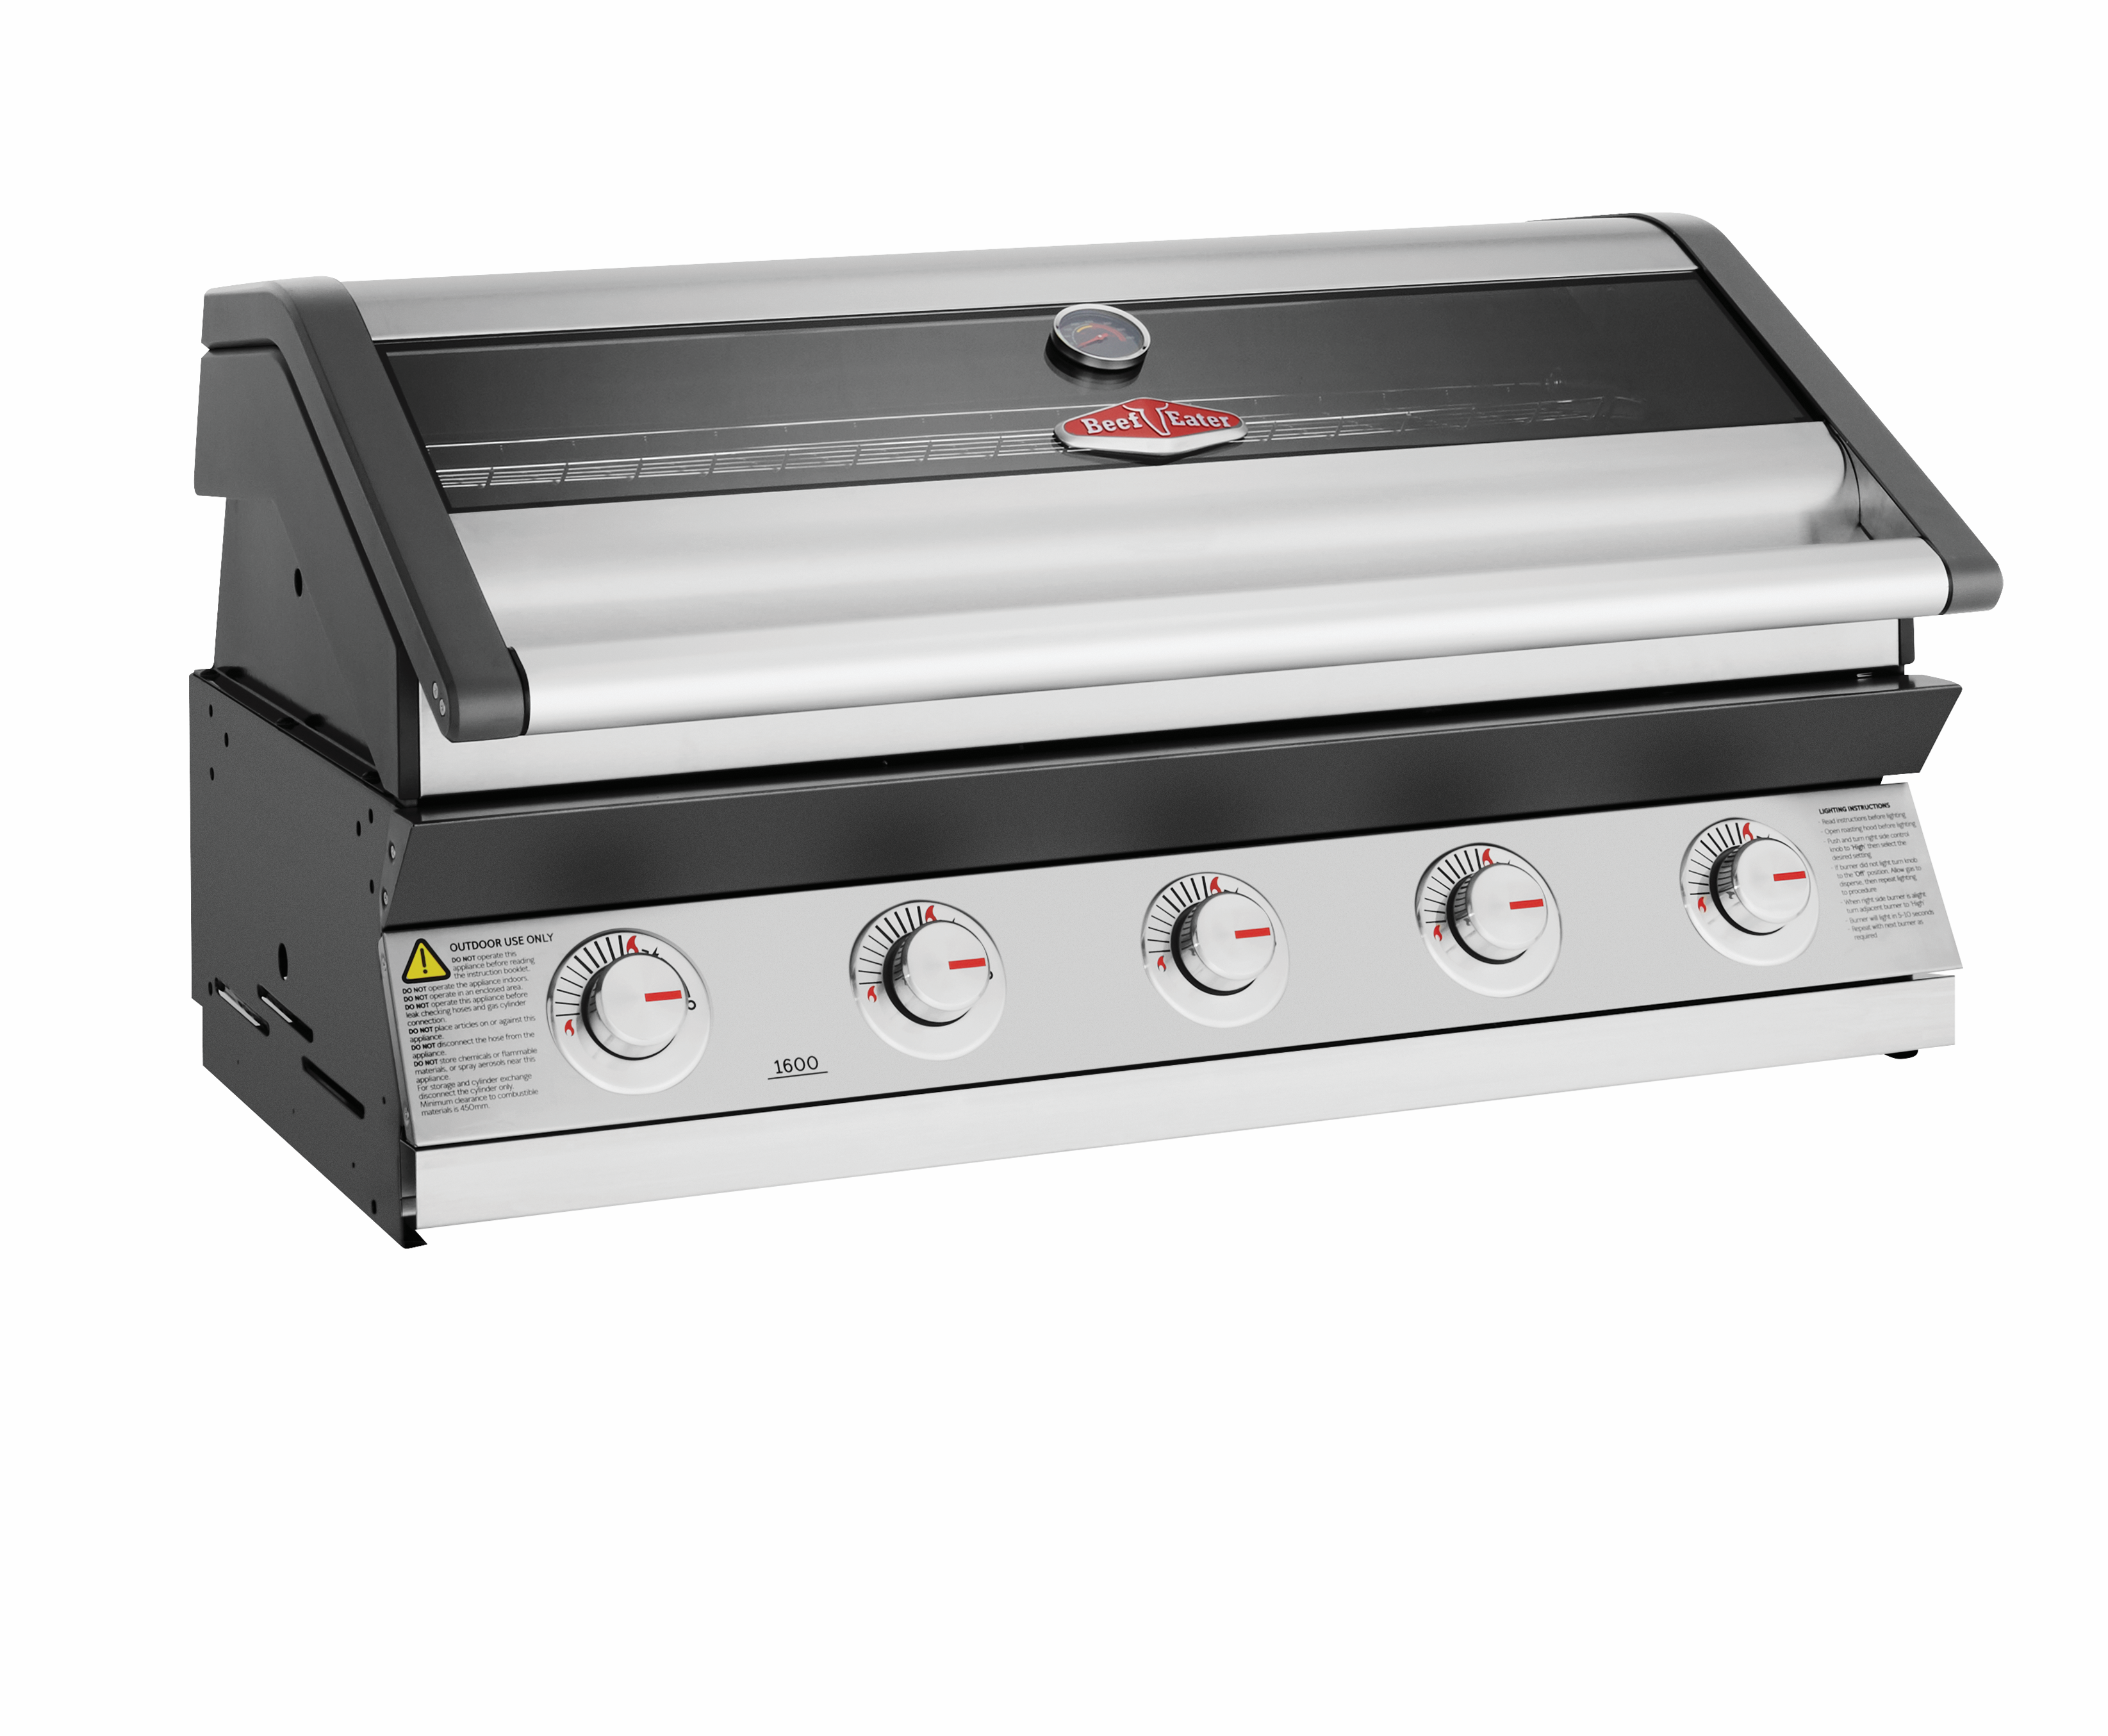 BeefEater - 1600S Series 5 Burner Built In Barbecue